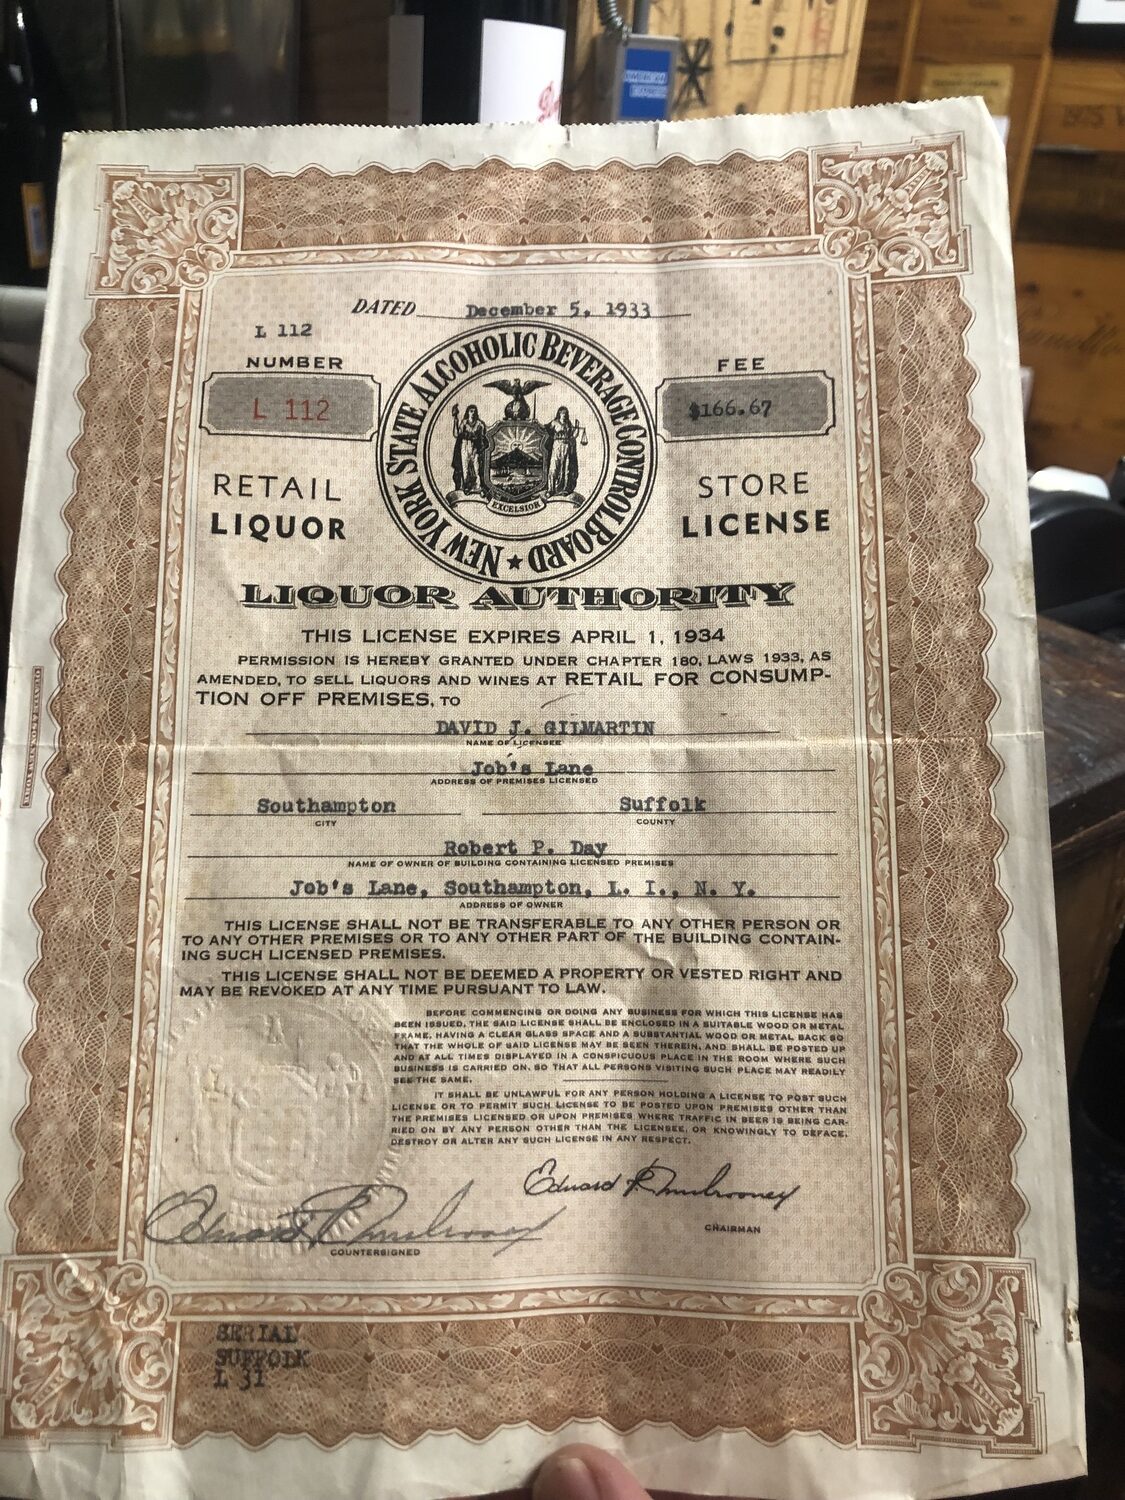 The original liquor license. Herbert and Rist opened the day after Prohibition ended.